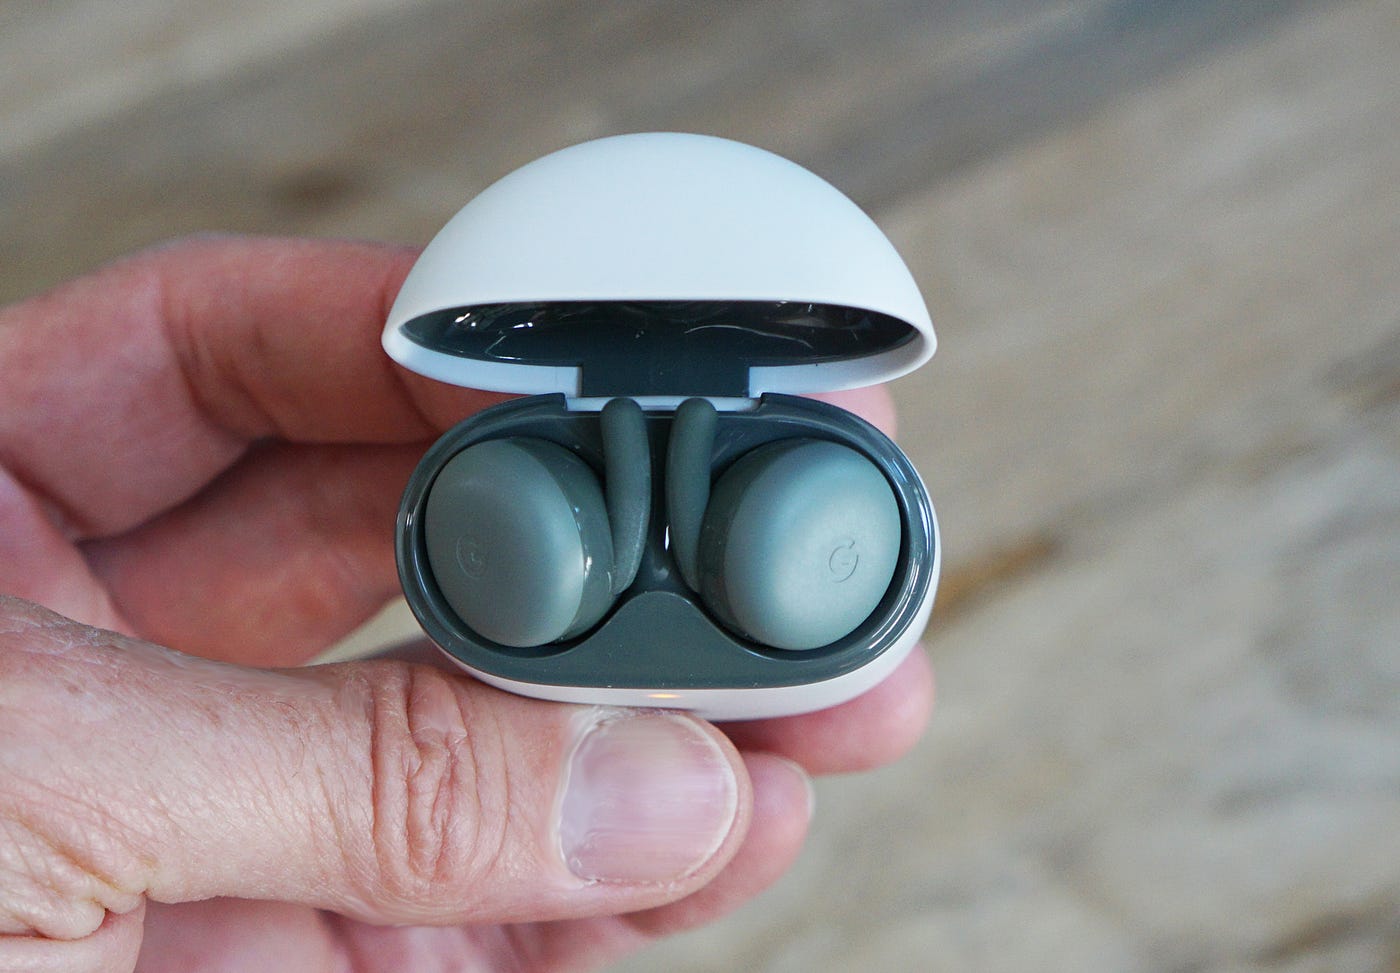 Pixel Buds A-Series review: Impressive features for $99